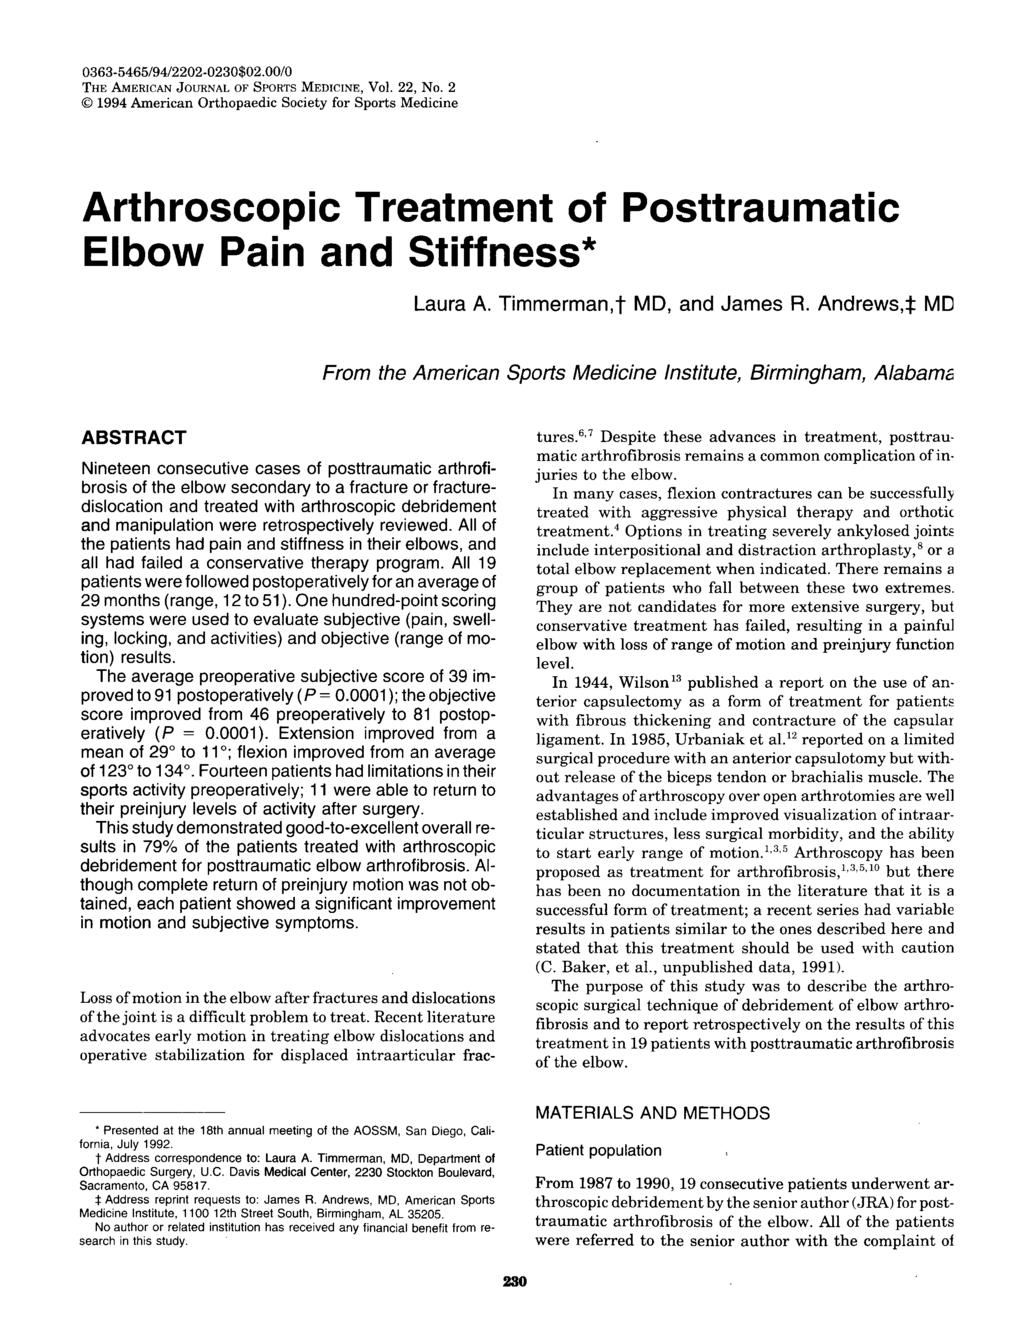 Arthroscopic Treatment of Posttraumatic Elbow Pain and Stiffness* Laura A. Timmerman, MD, and James R.